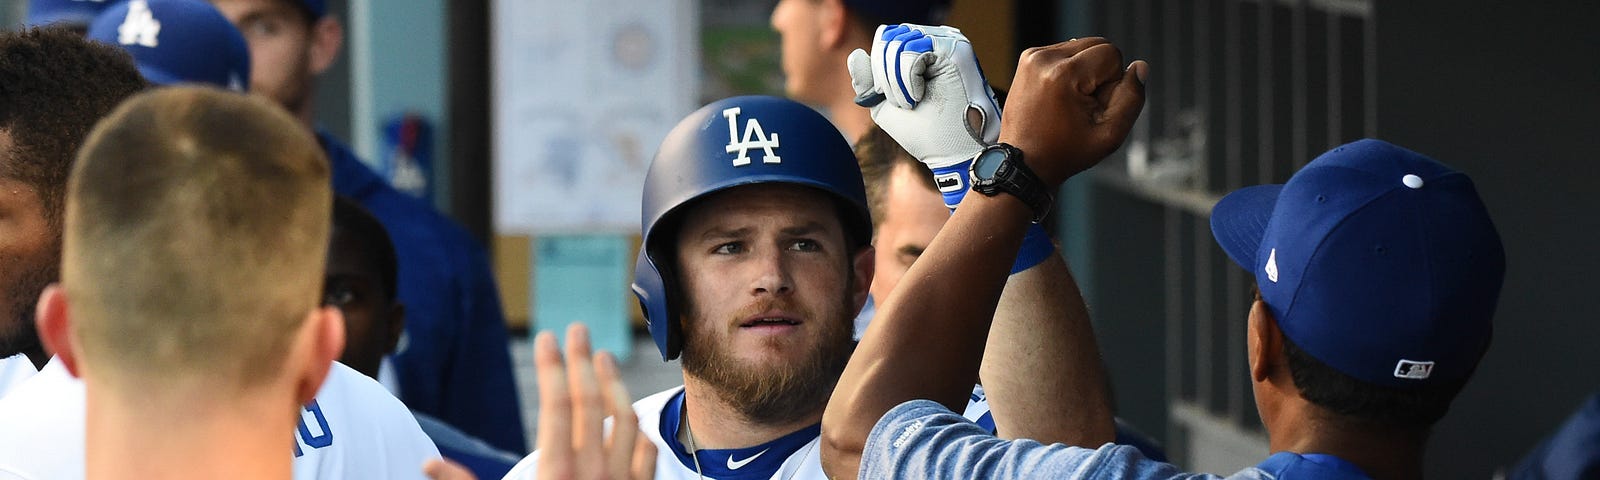 Introducing the 2020 Dodgers Yearbook, by Rowan Kavner